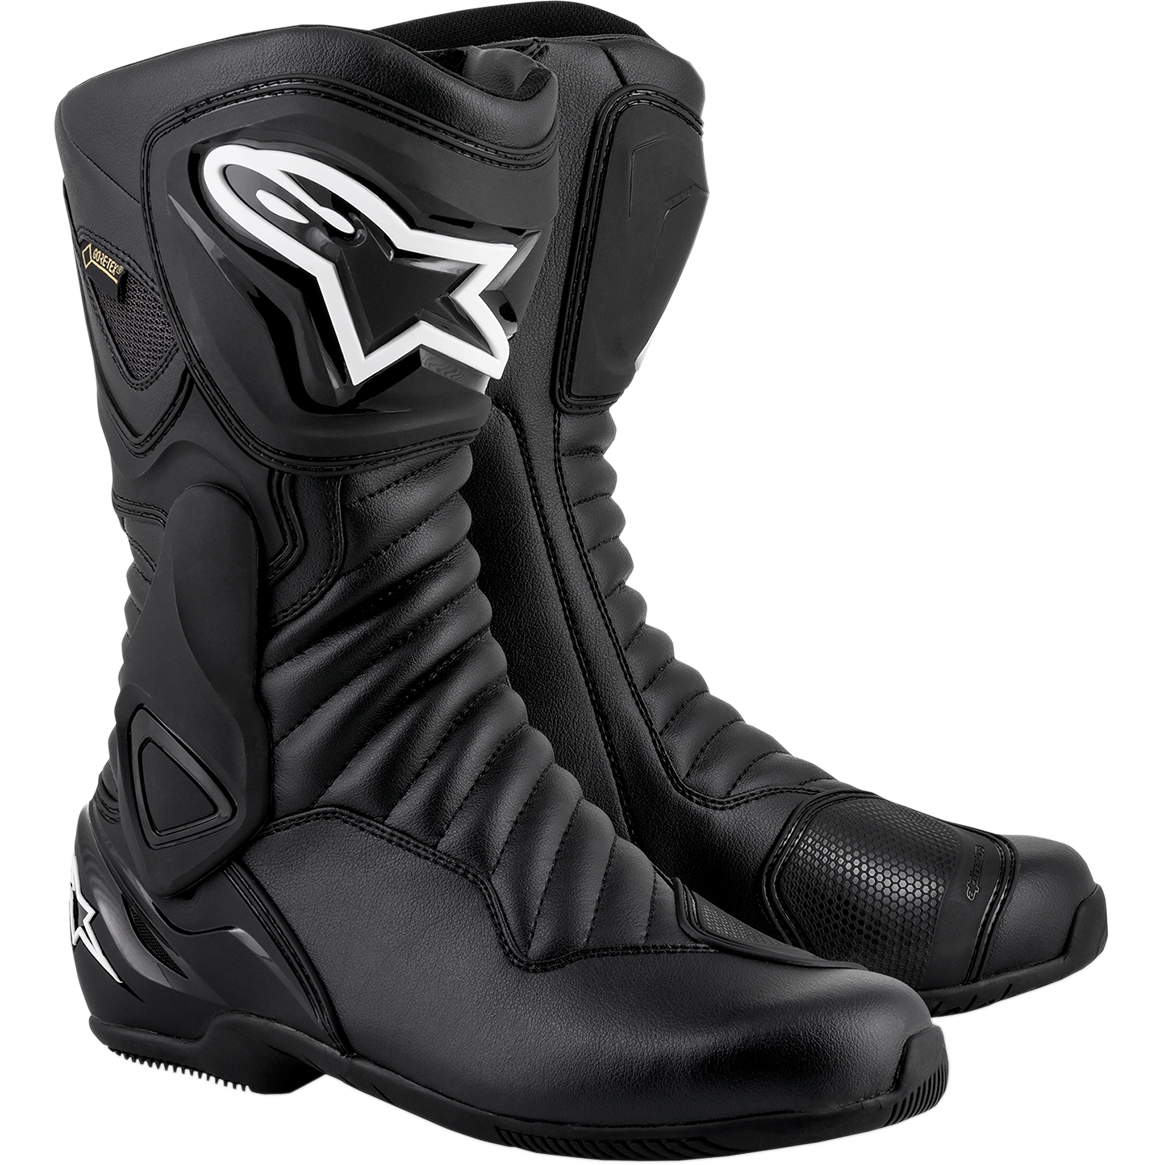 Smx-6 V2 Gore-Tex Boots -